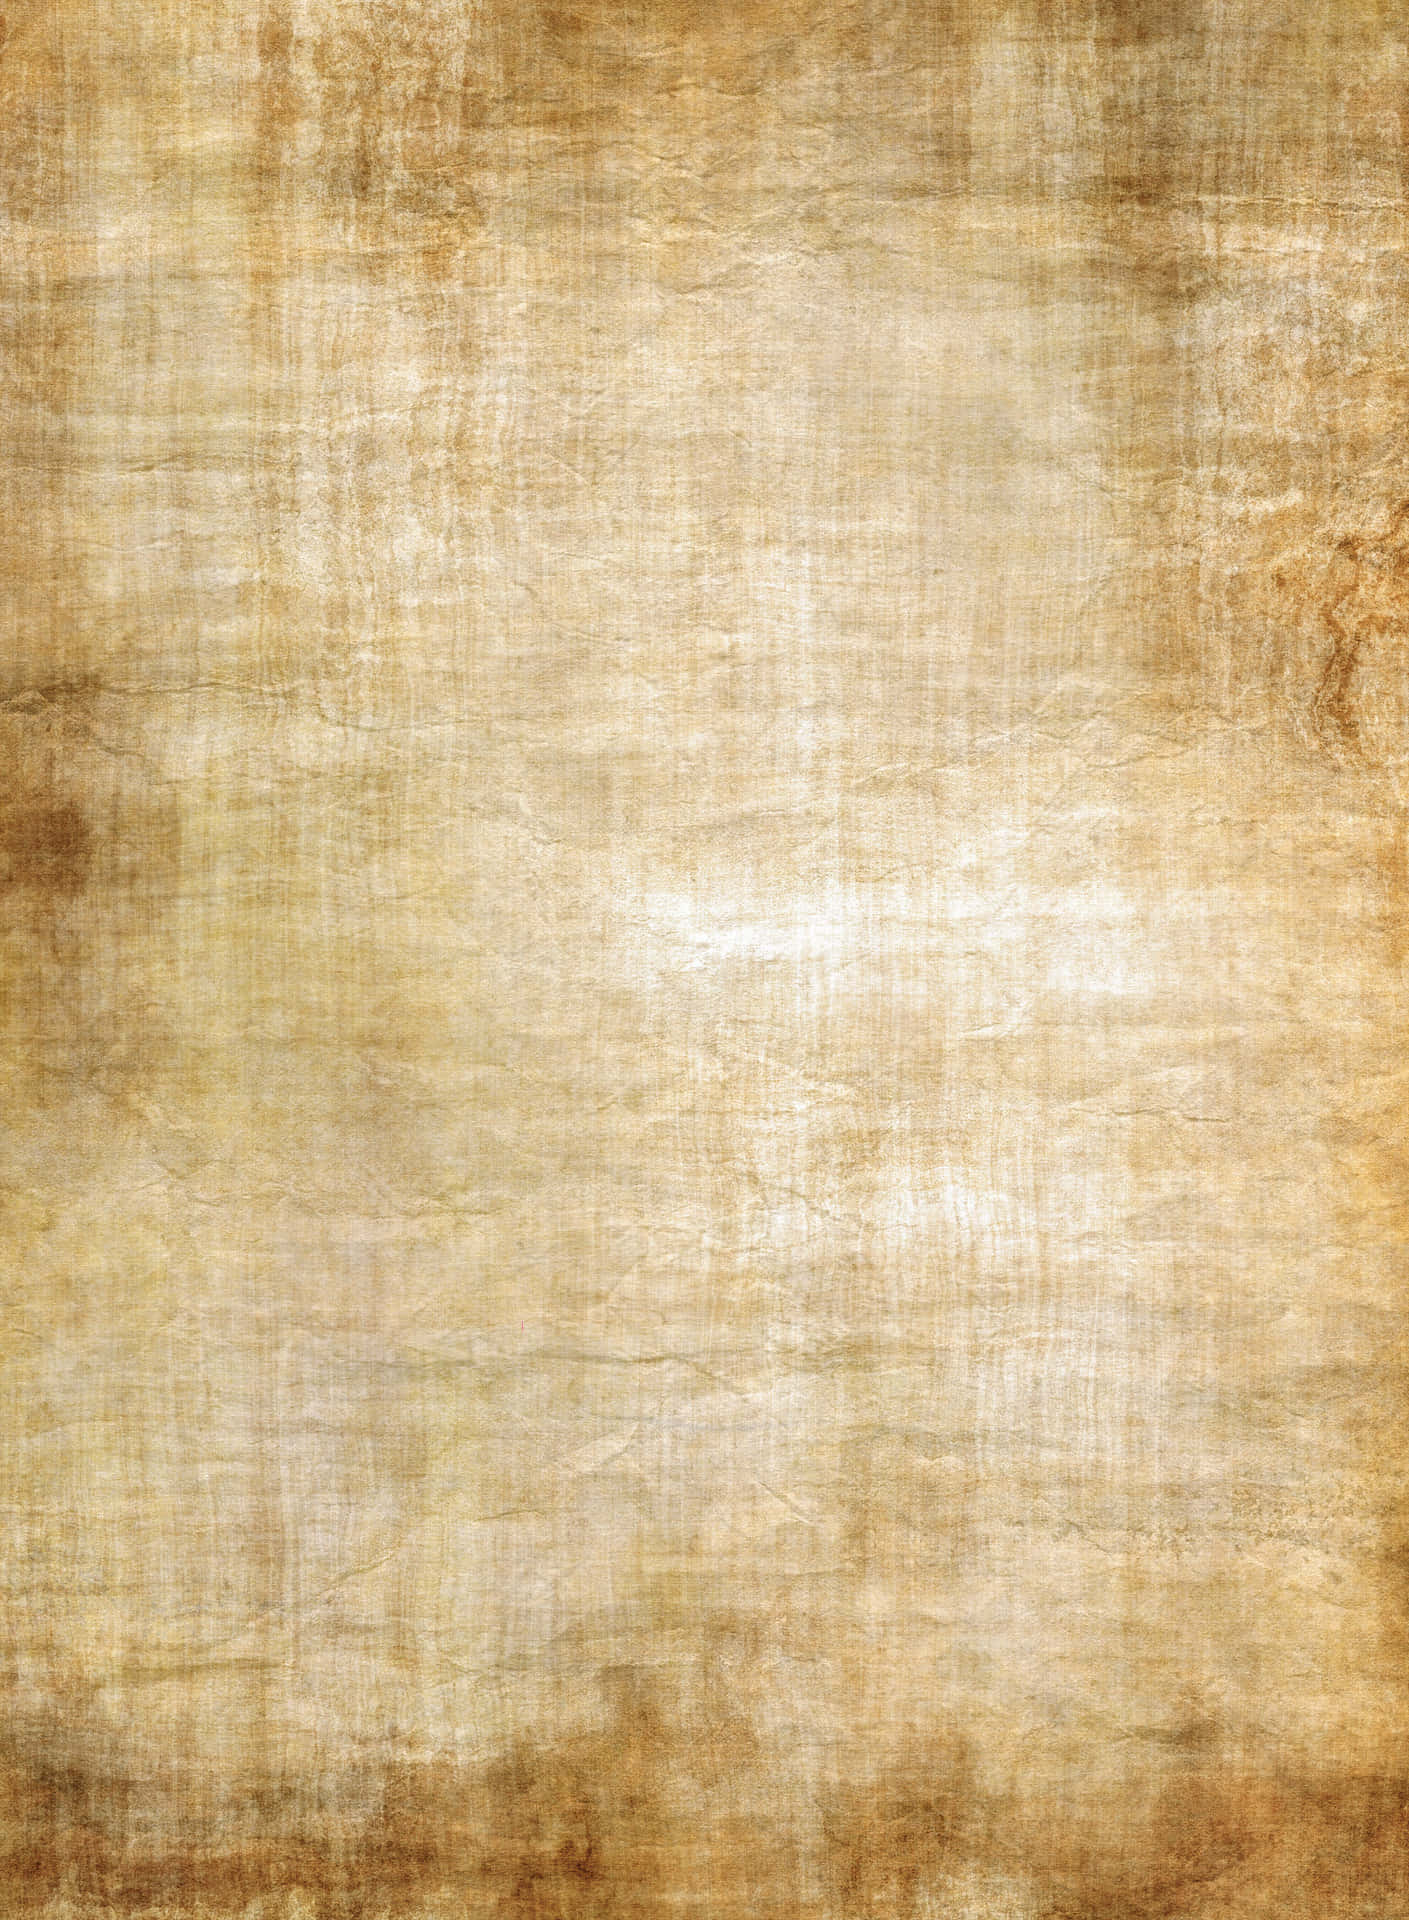 An Old Paper Texture With A Brown Background